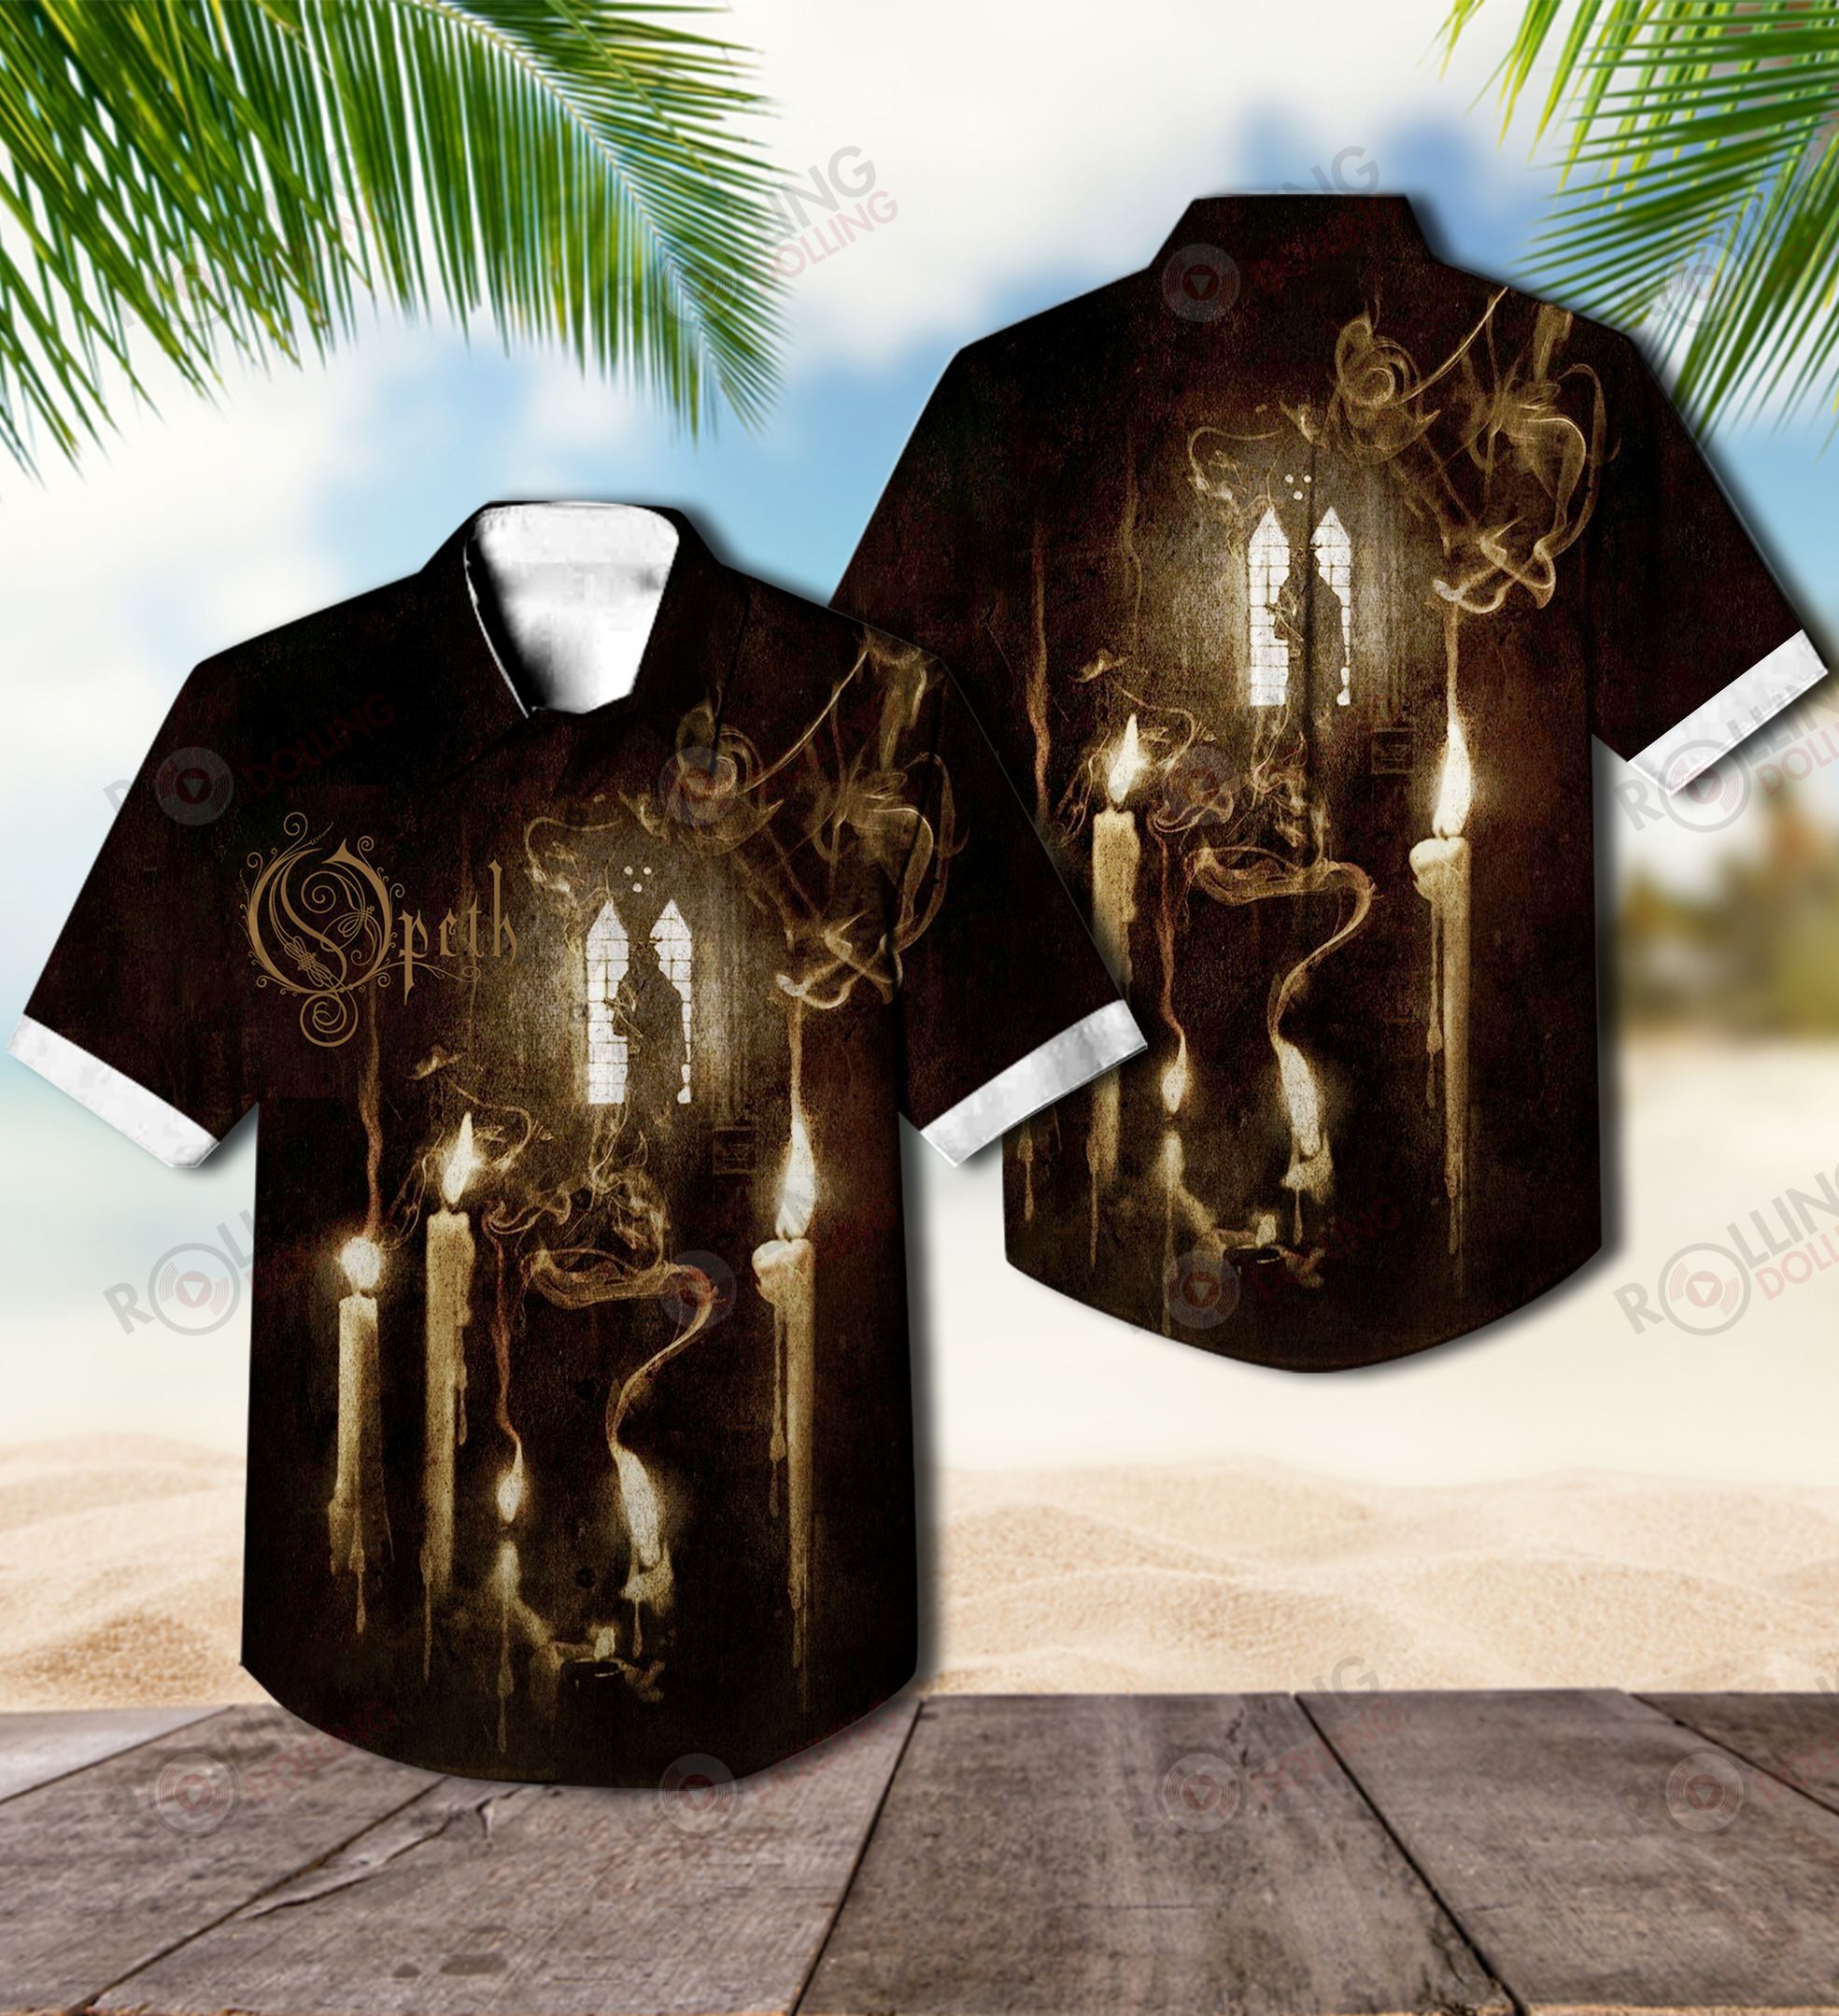 This would make a great gift for any fan who loves Hawaiian Shirt as well as Rock band 9